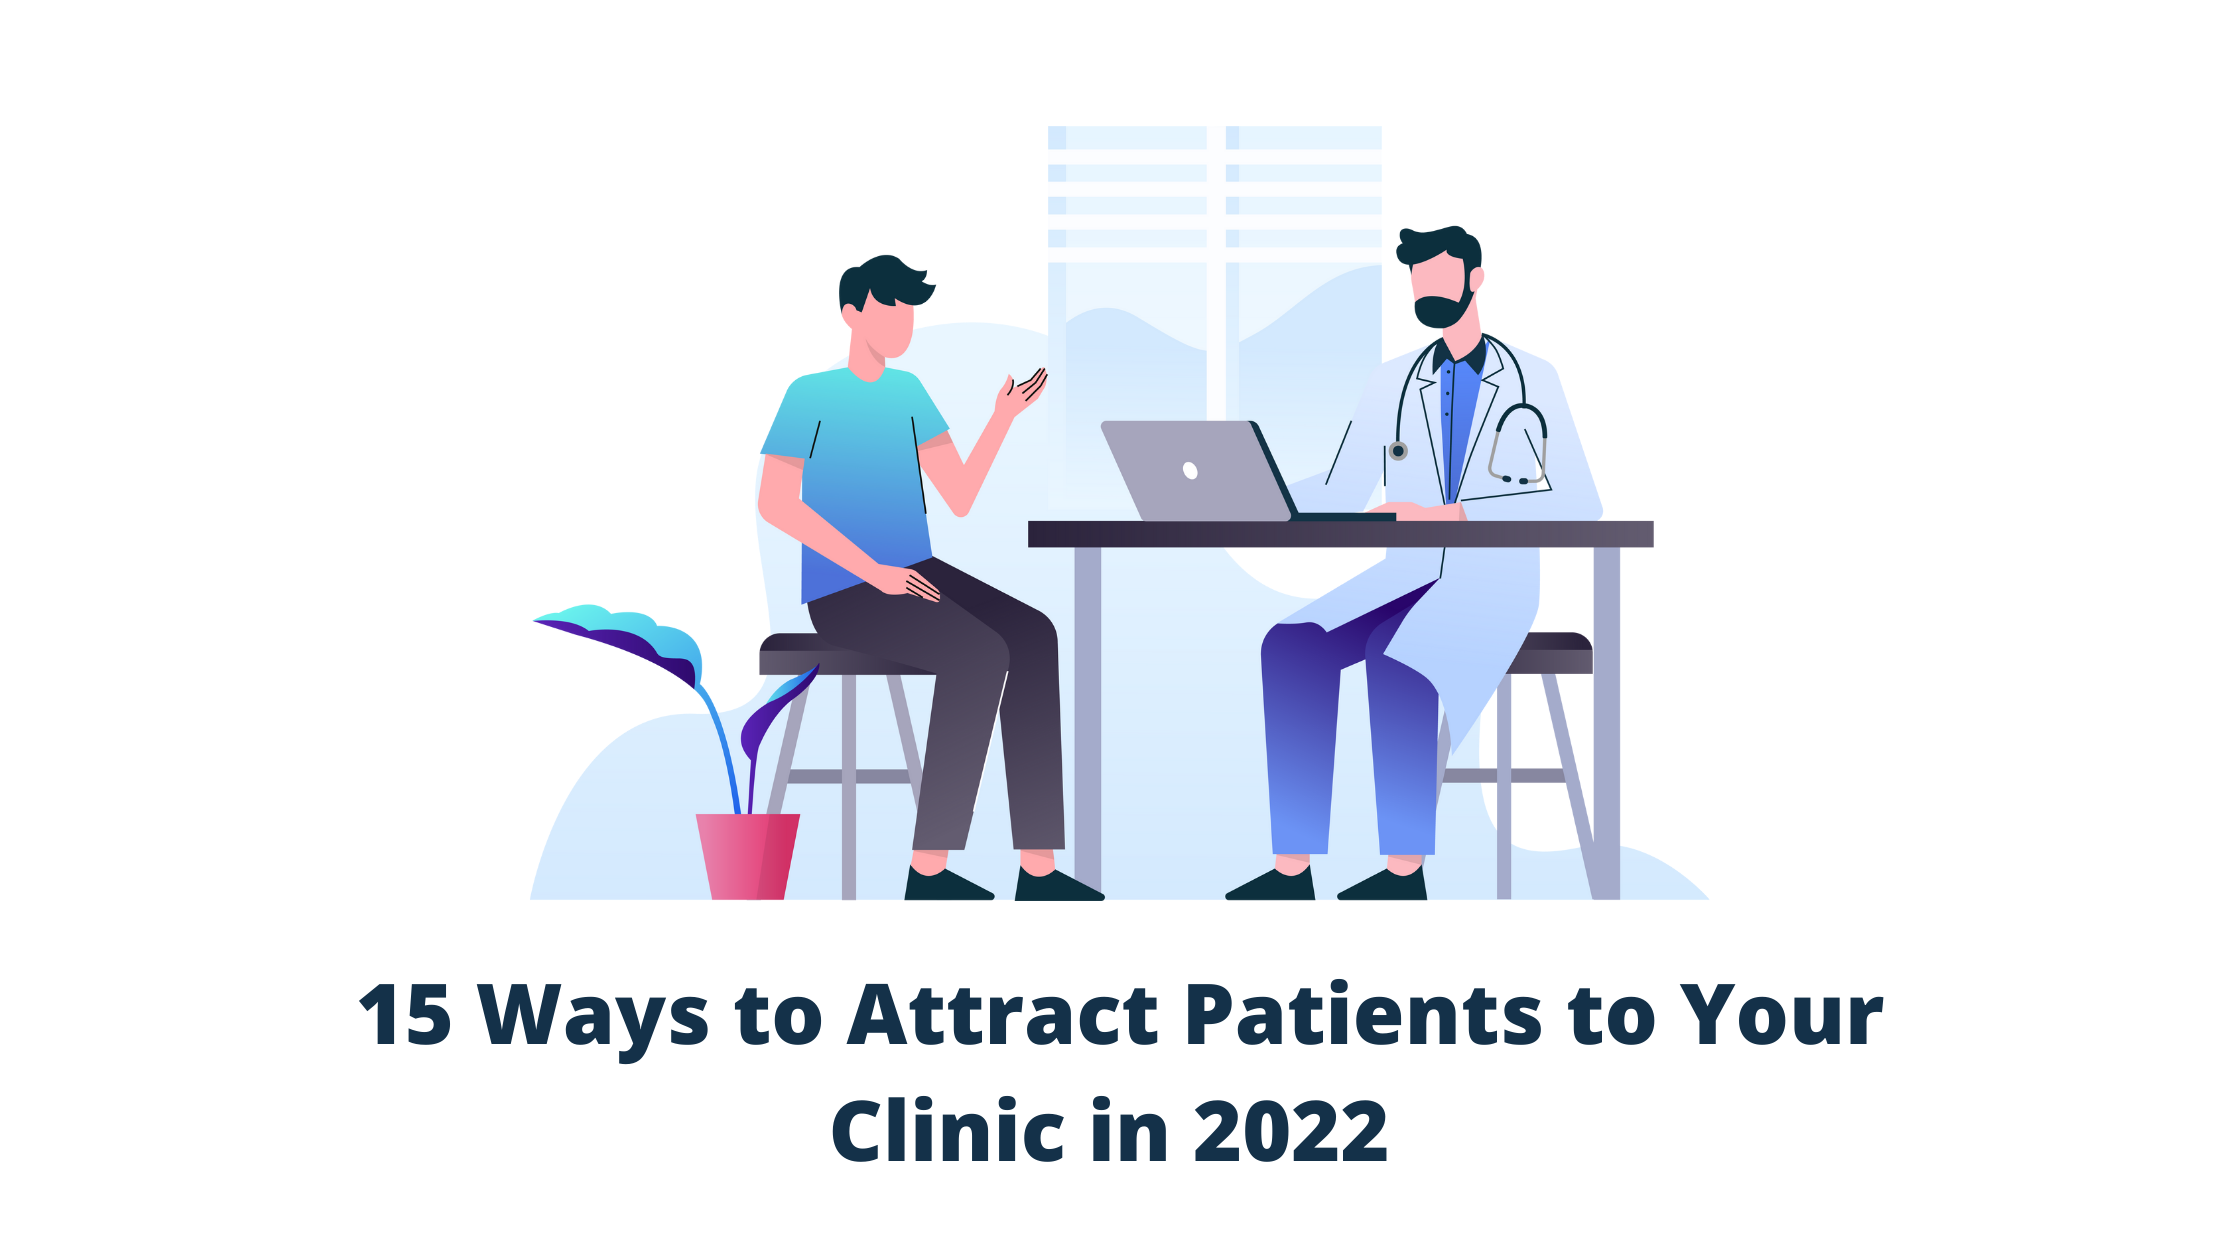 15 Ways to Attract Patients to Your Clinic in 2022 